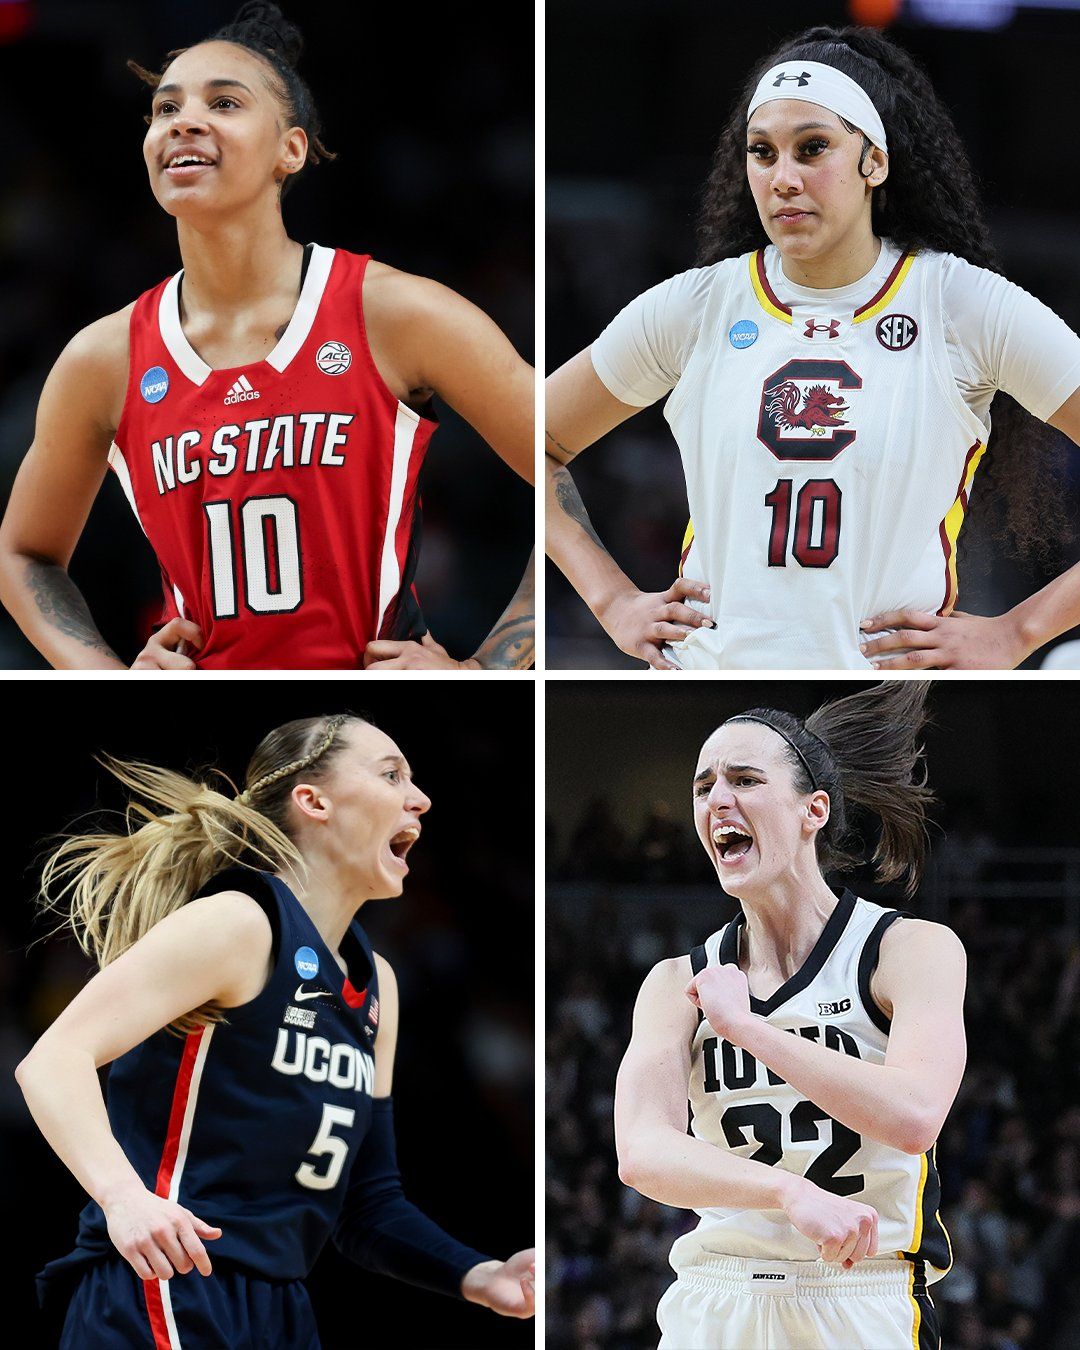 Today's women's Final Four is packed with star power